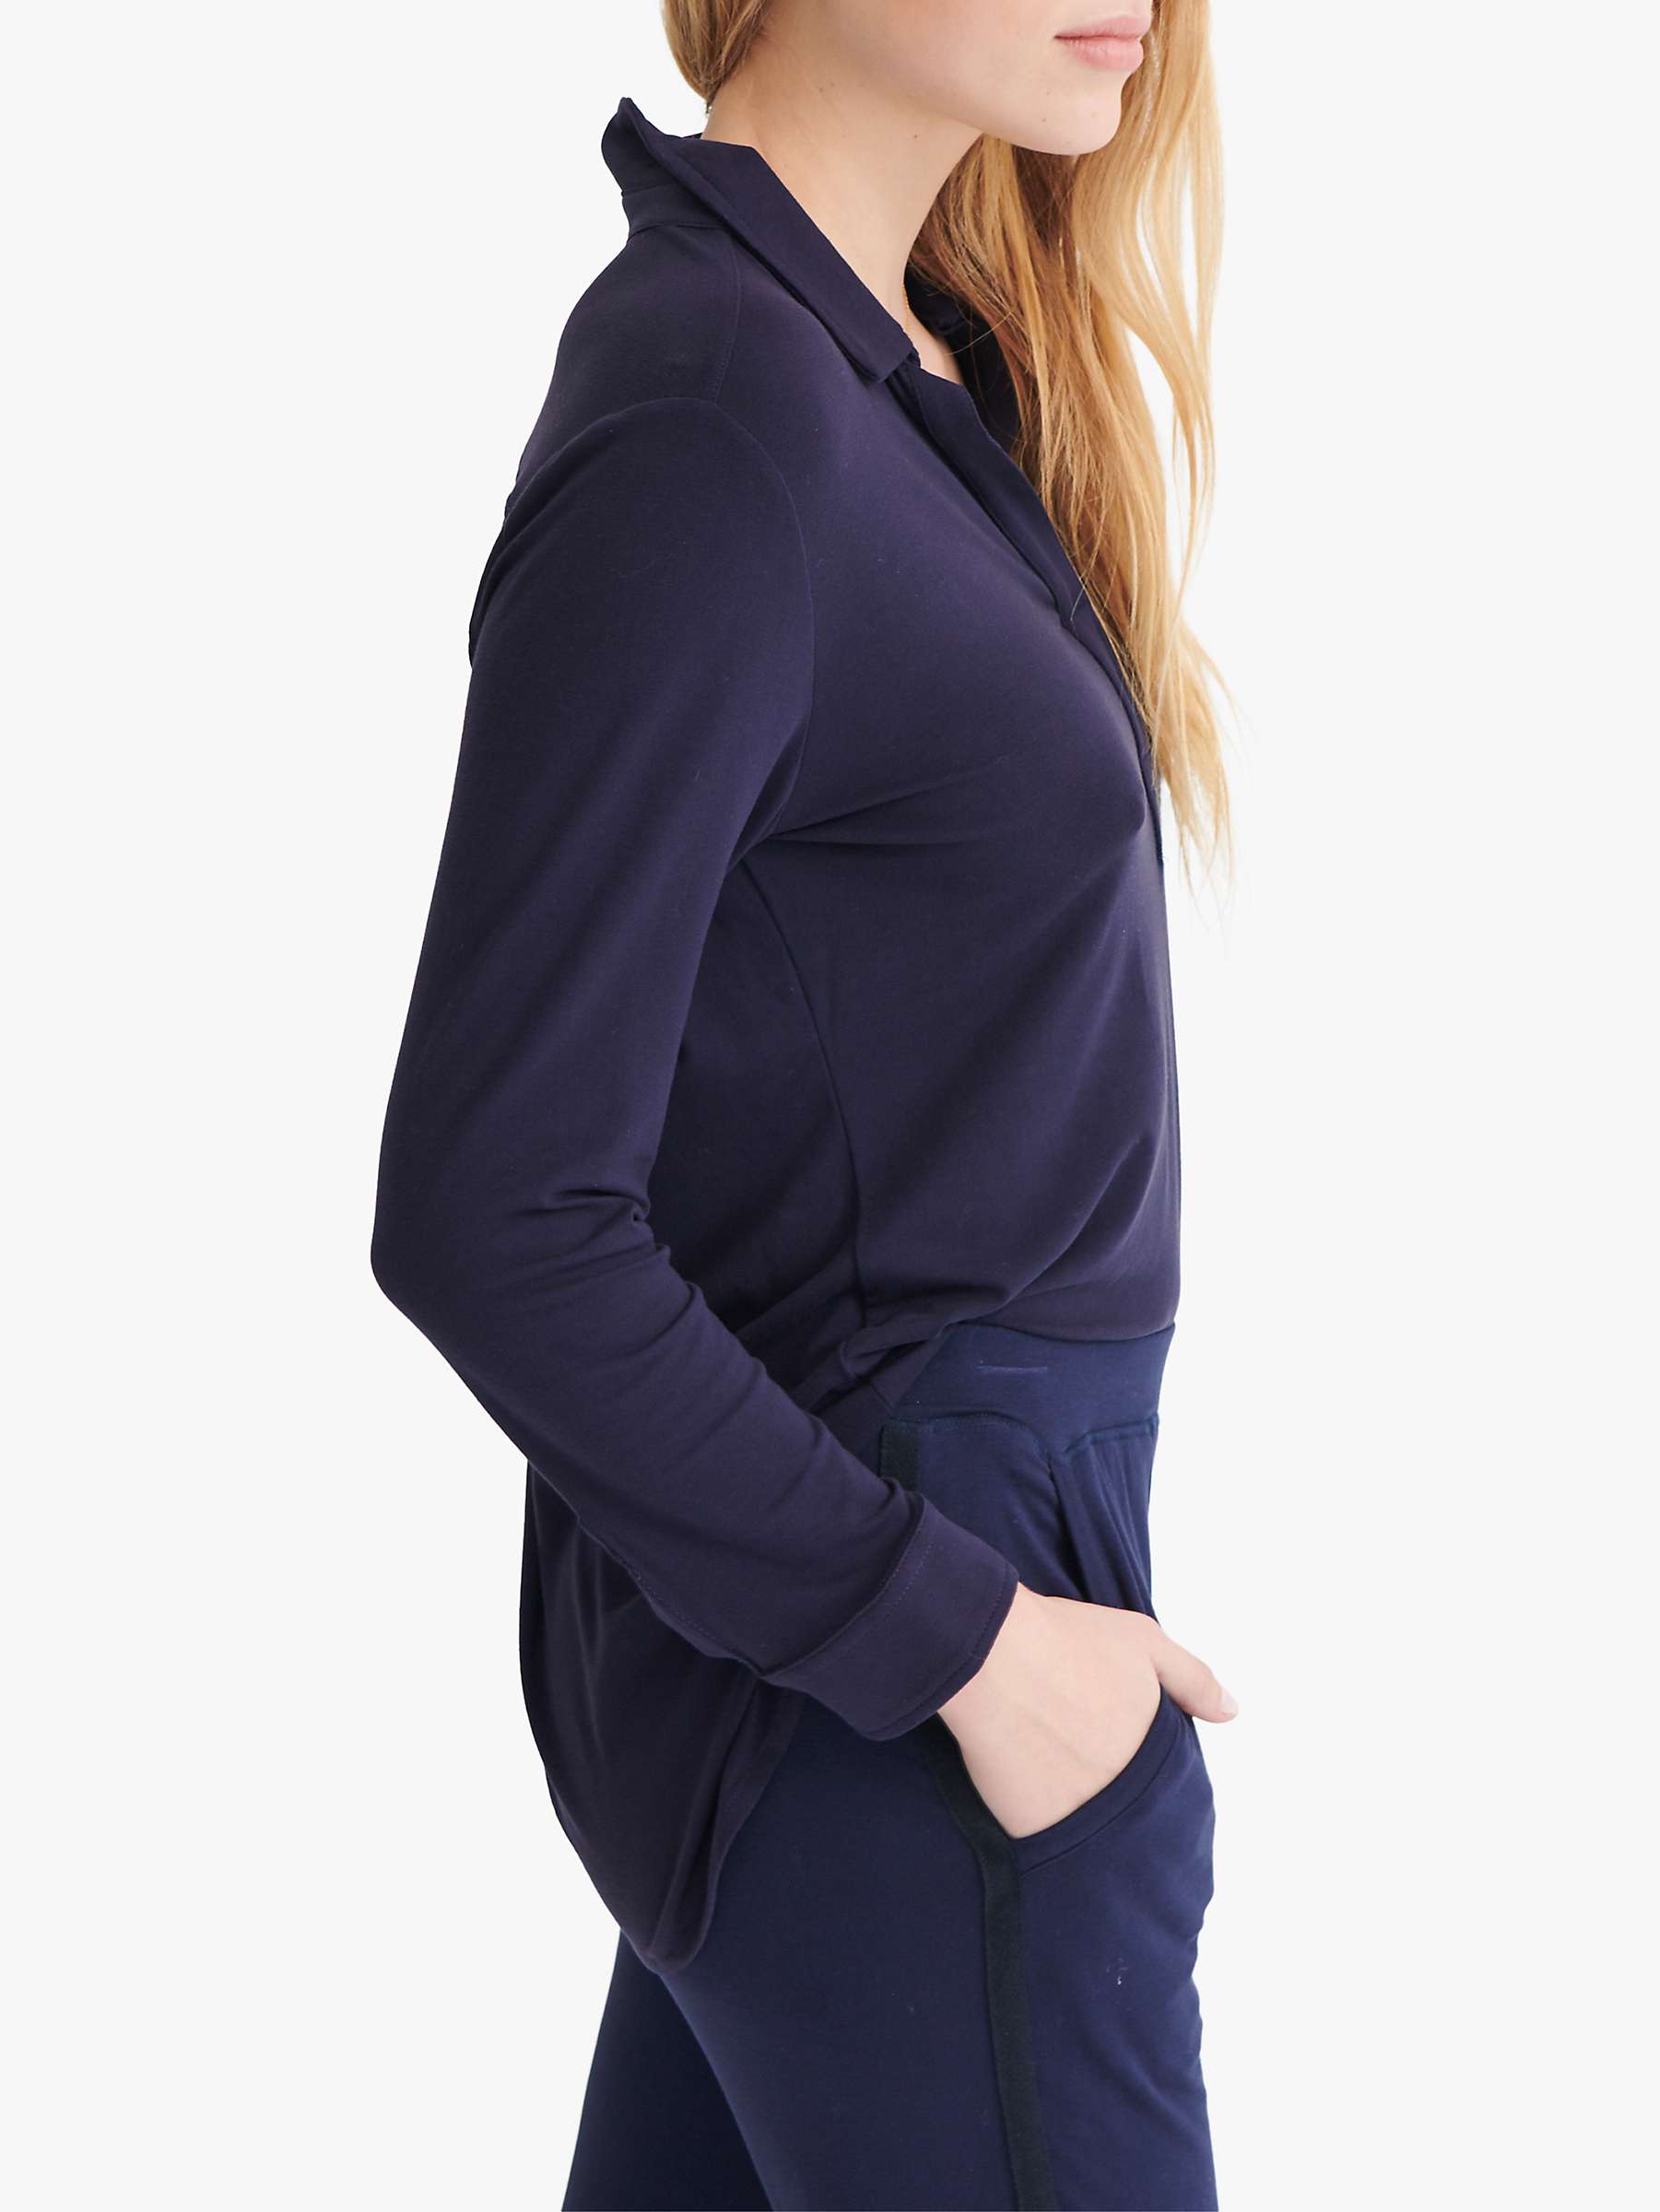 Buy NRBY Evie Jersey Blouse, Navy Online at johnlewis.com